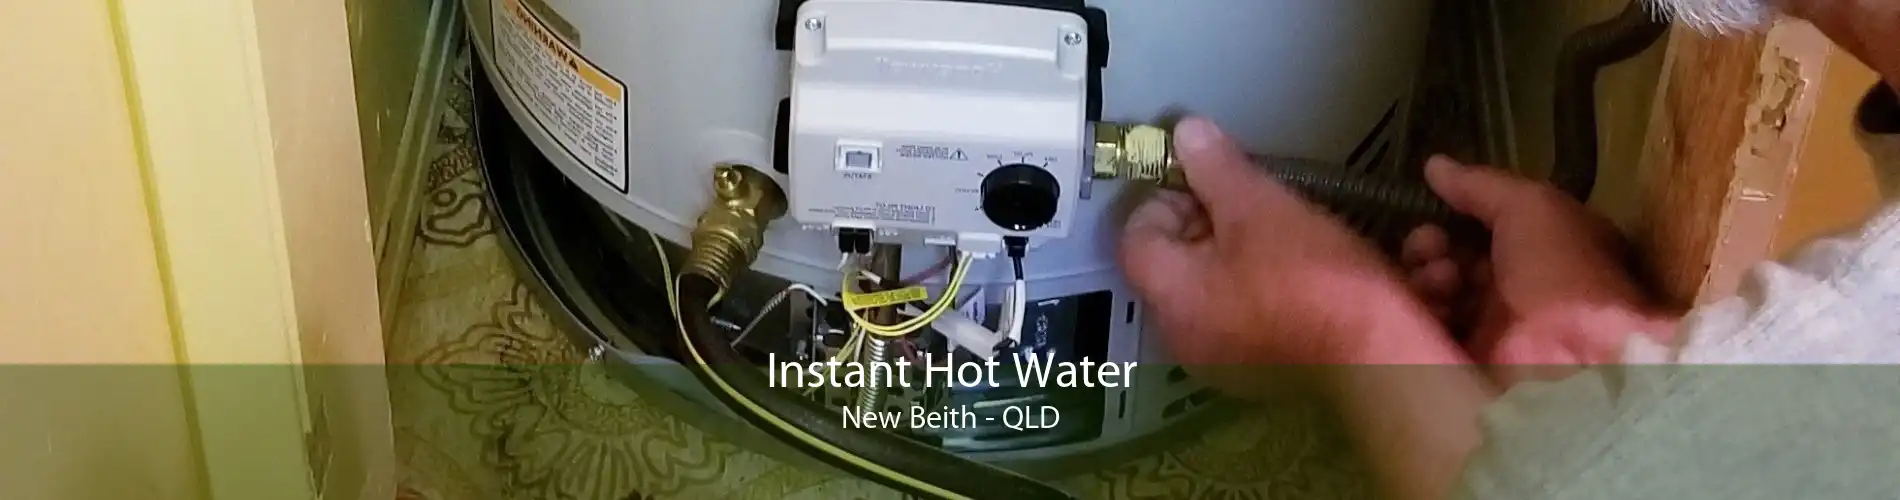 Instant Hot Water New Beith - QLD